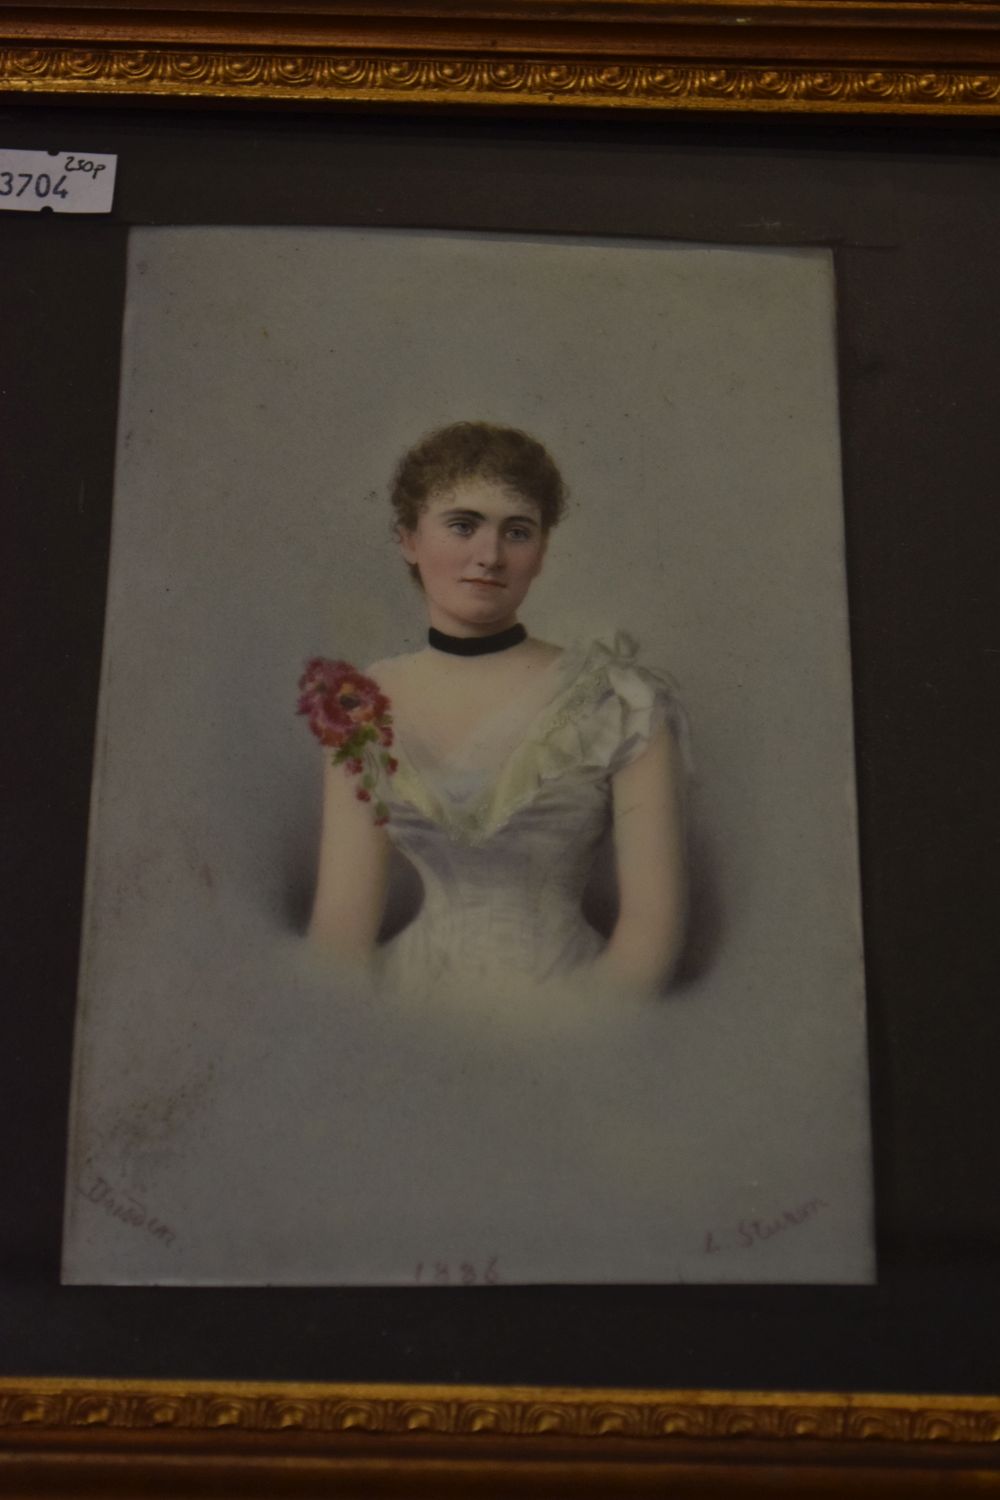 L. Sturn (19th Century German) - Portrait miniature on porcelain - Lady in a white dress, signed and - Image 2 of 11